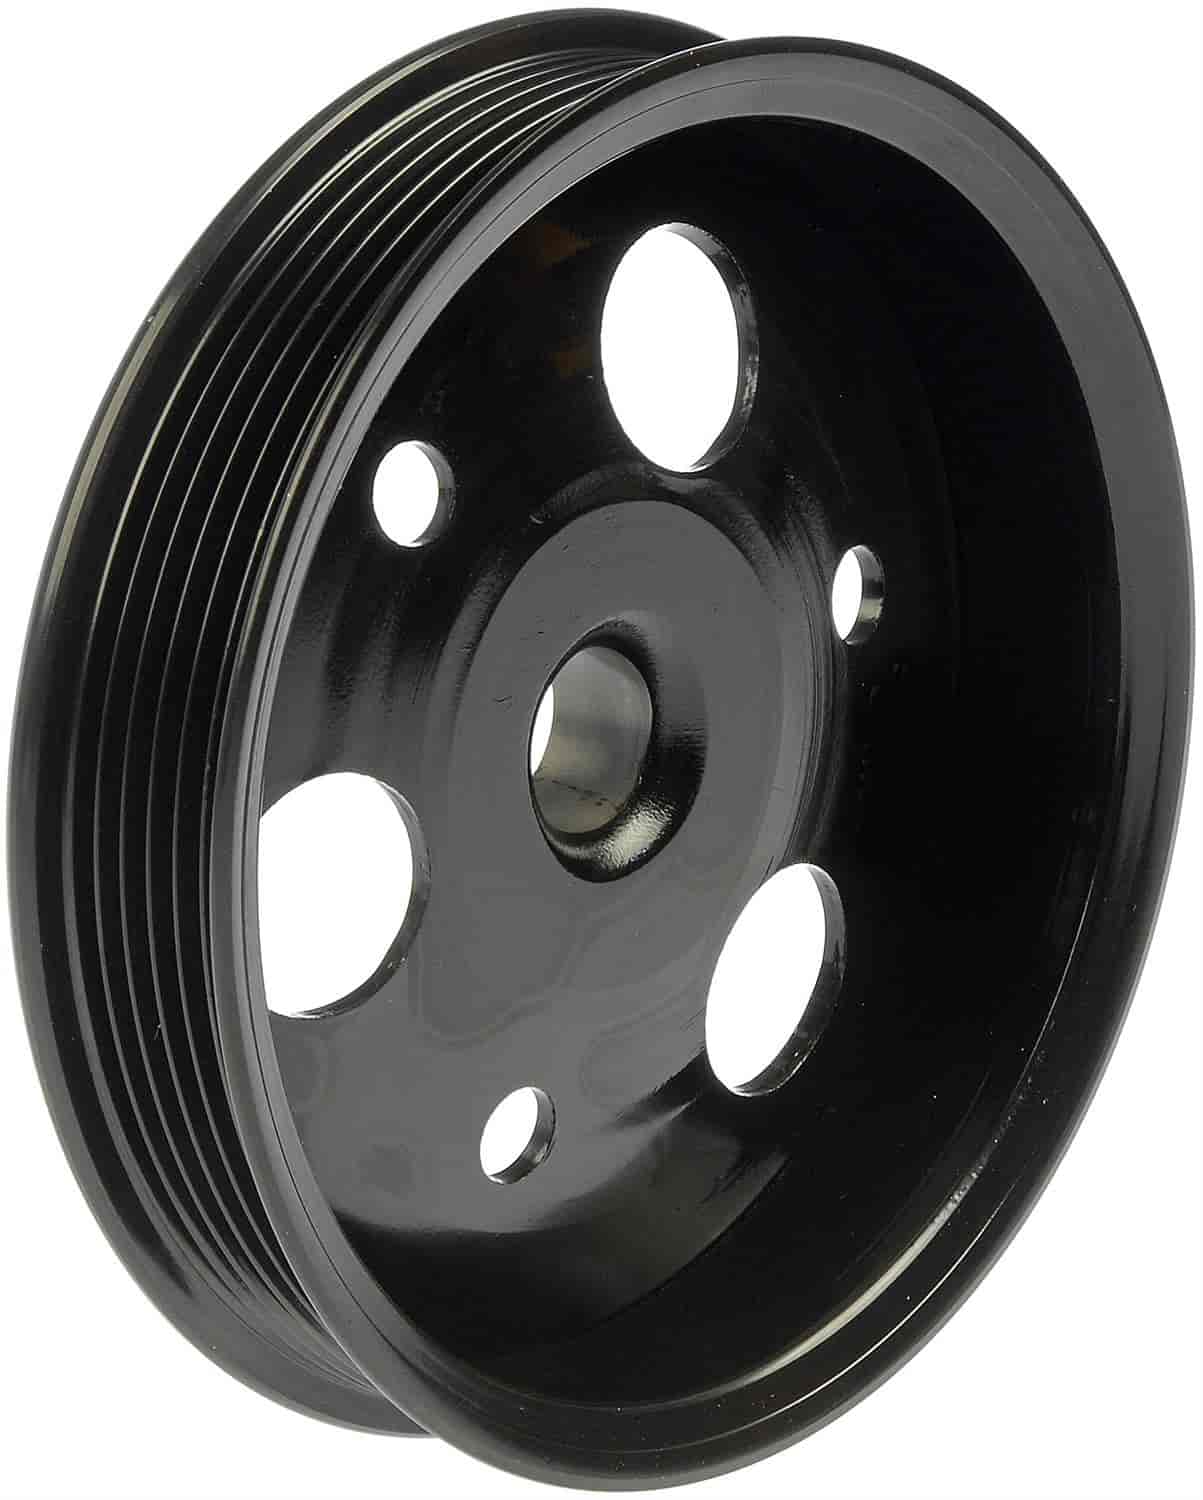 Power Steering Pump Pulley 1995-2007 Chevy/Buick/Cadillac/Pontiac/Olds 3.8L V6